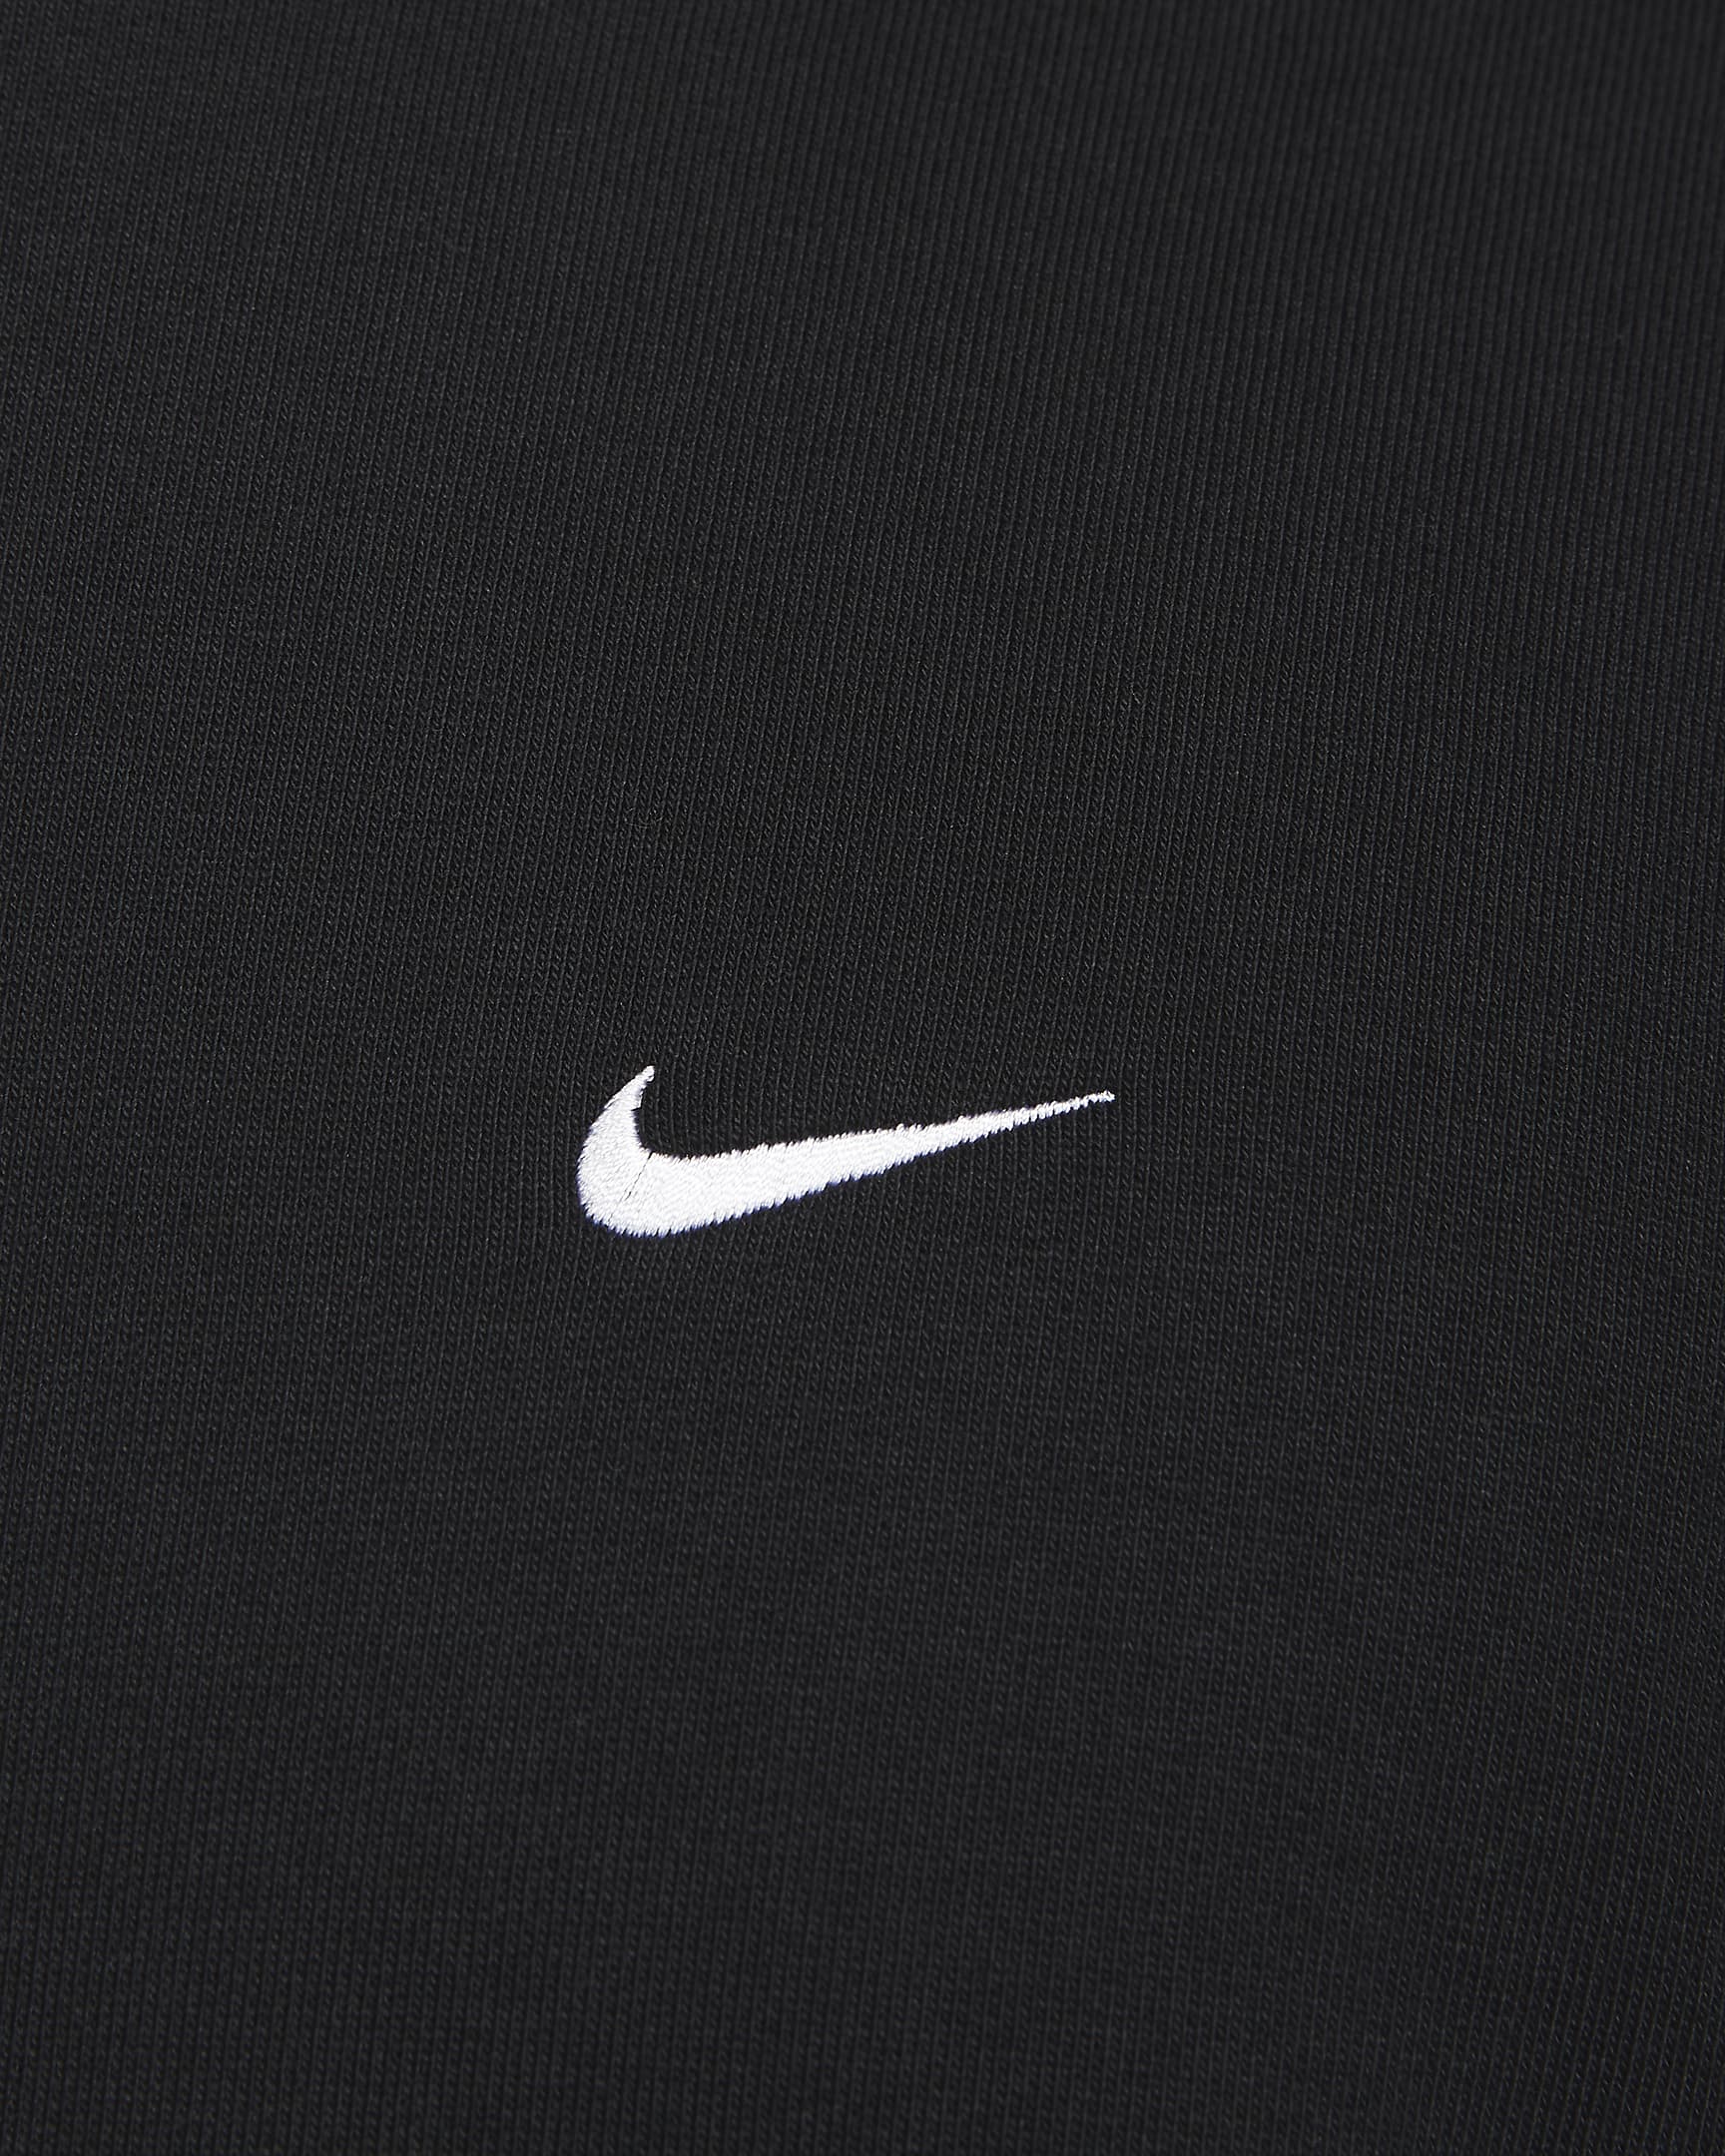 Nike Solo Swoosh Men's Short-Sleeve French Terry Top. Nike.com